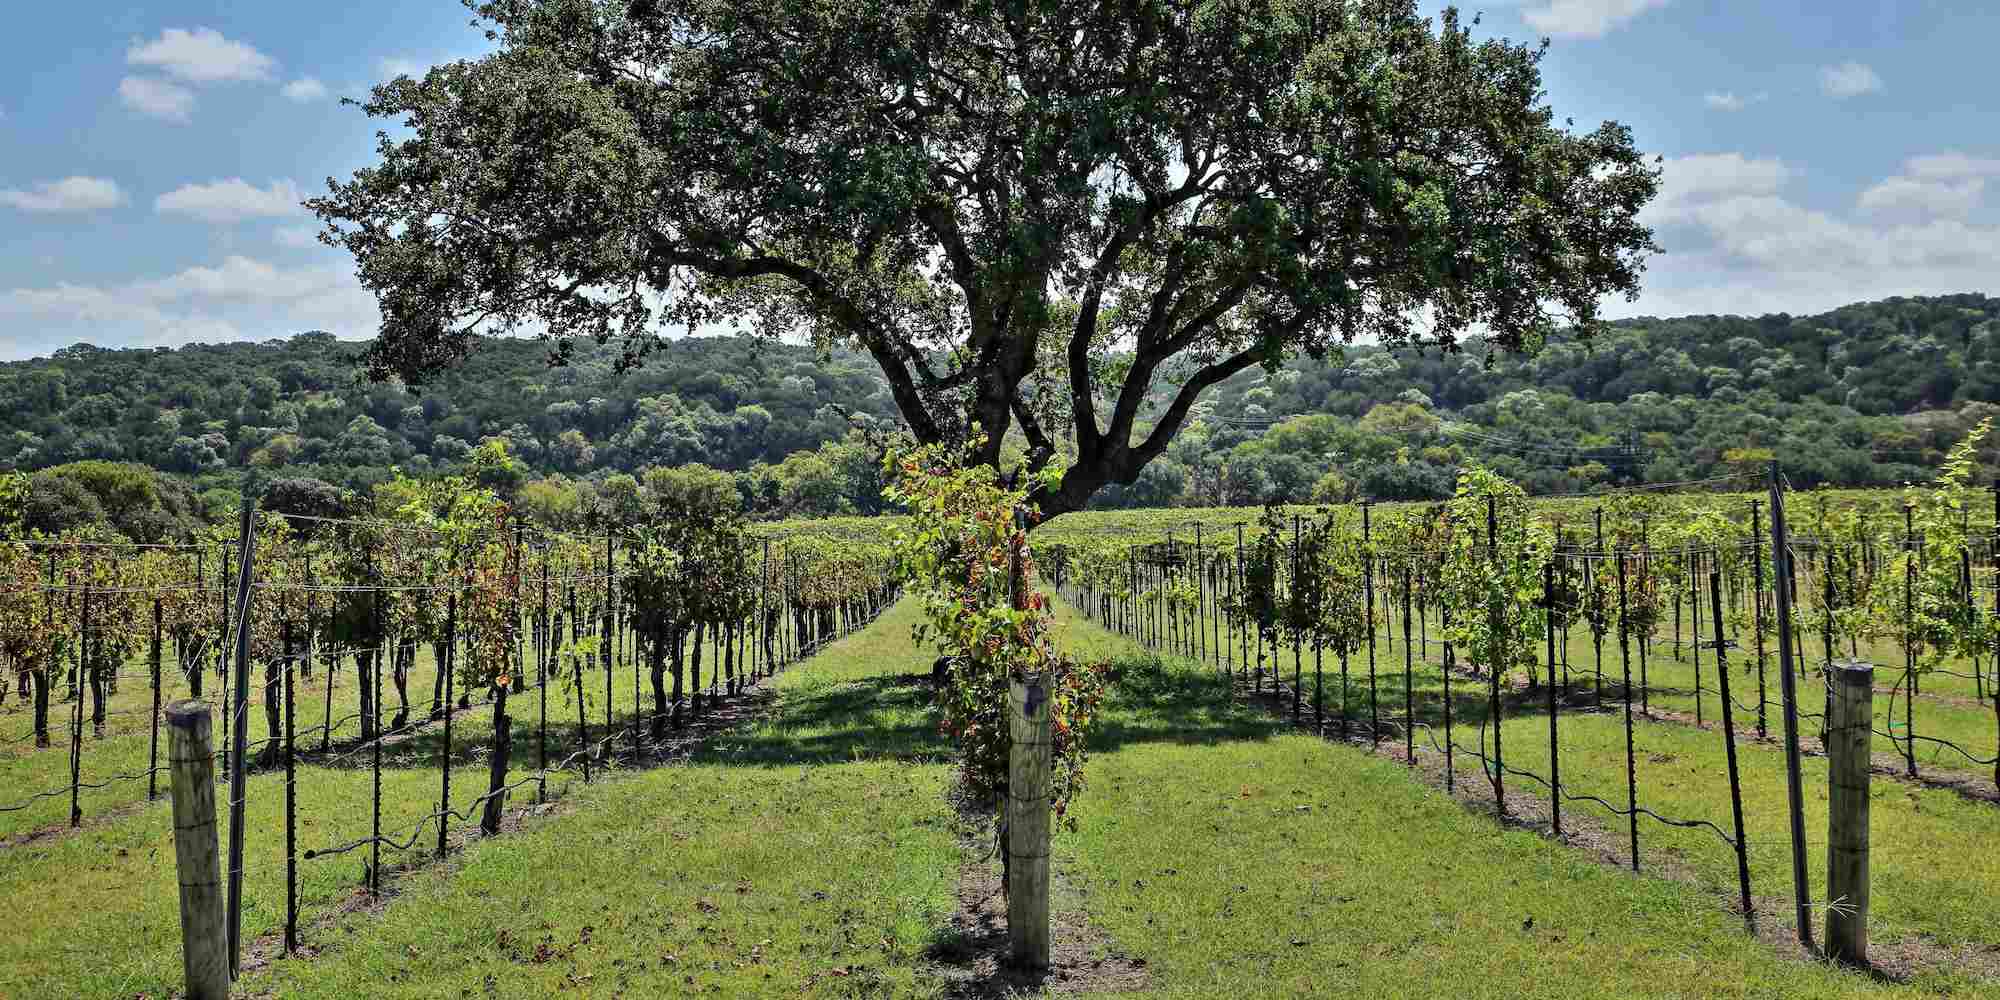 A vineyard in Texas, growing local grapes